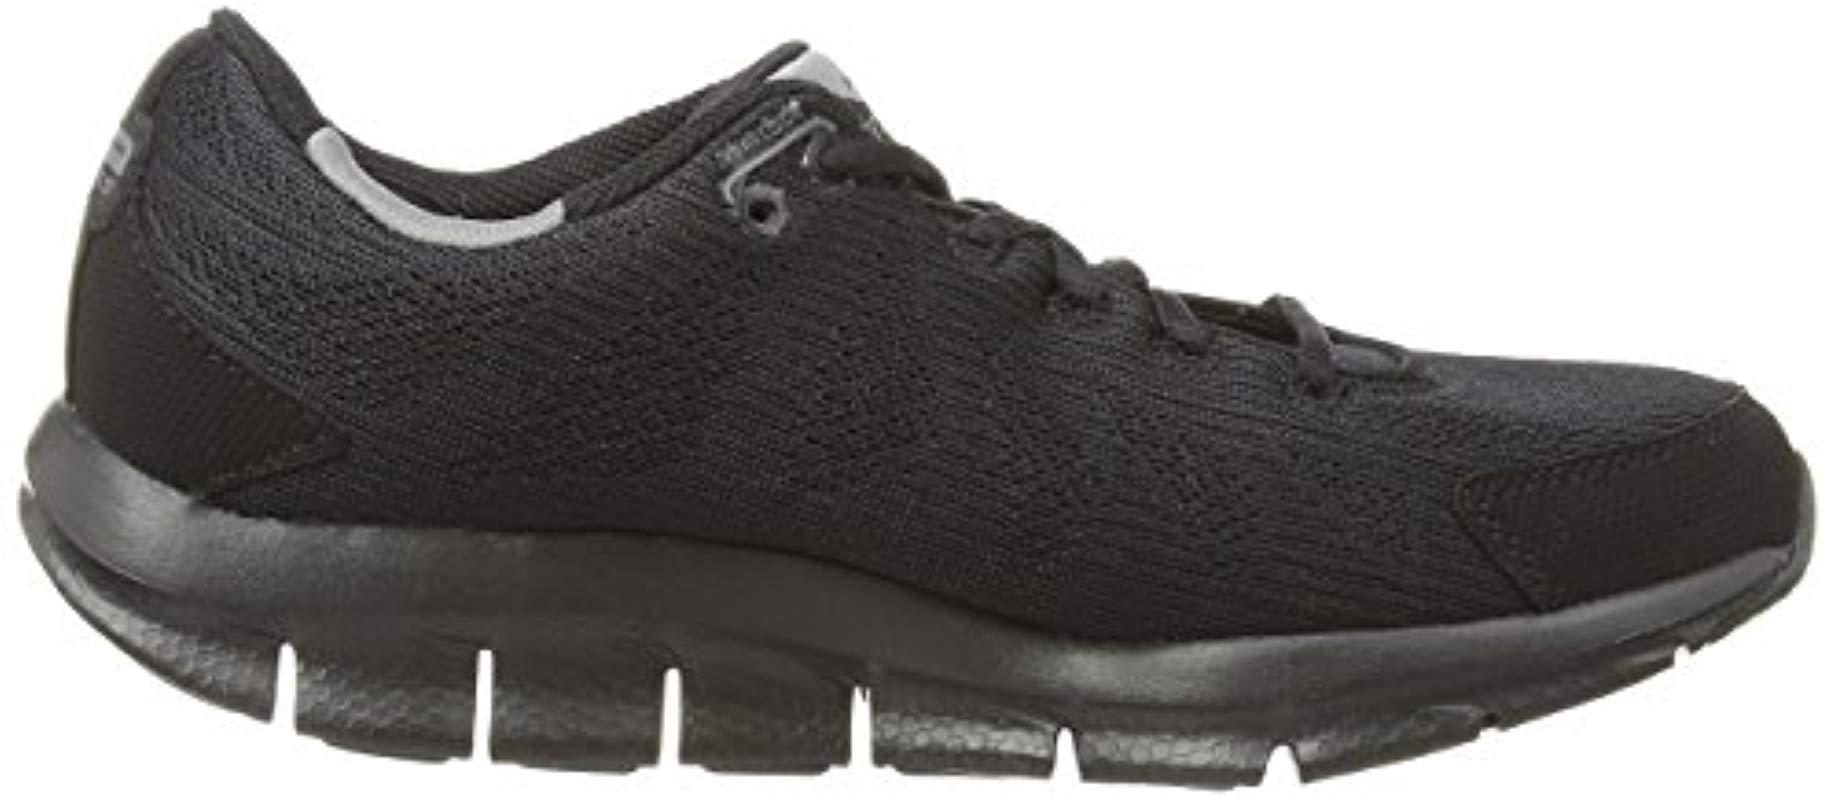 skechers shape ups liv go spacey women's fitness shoes Off 64% -  pizza-rg91.fr